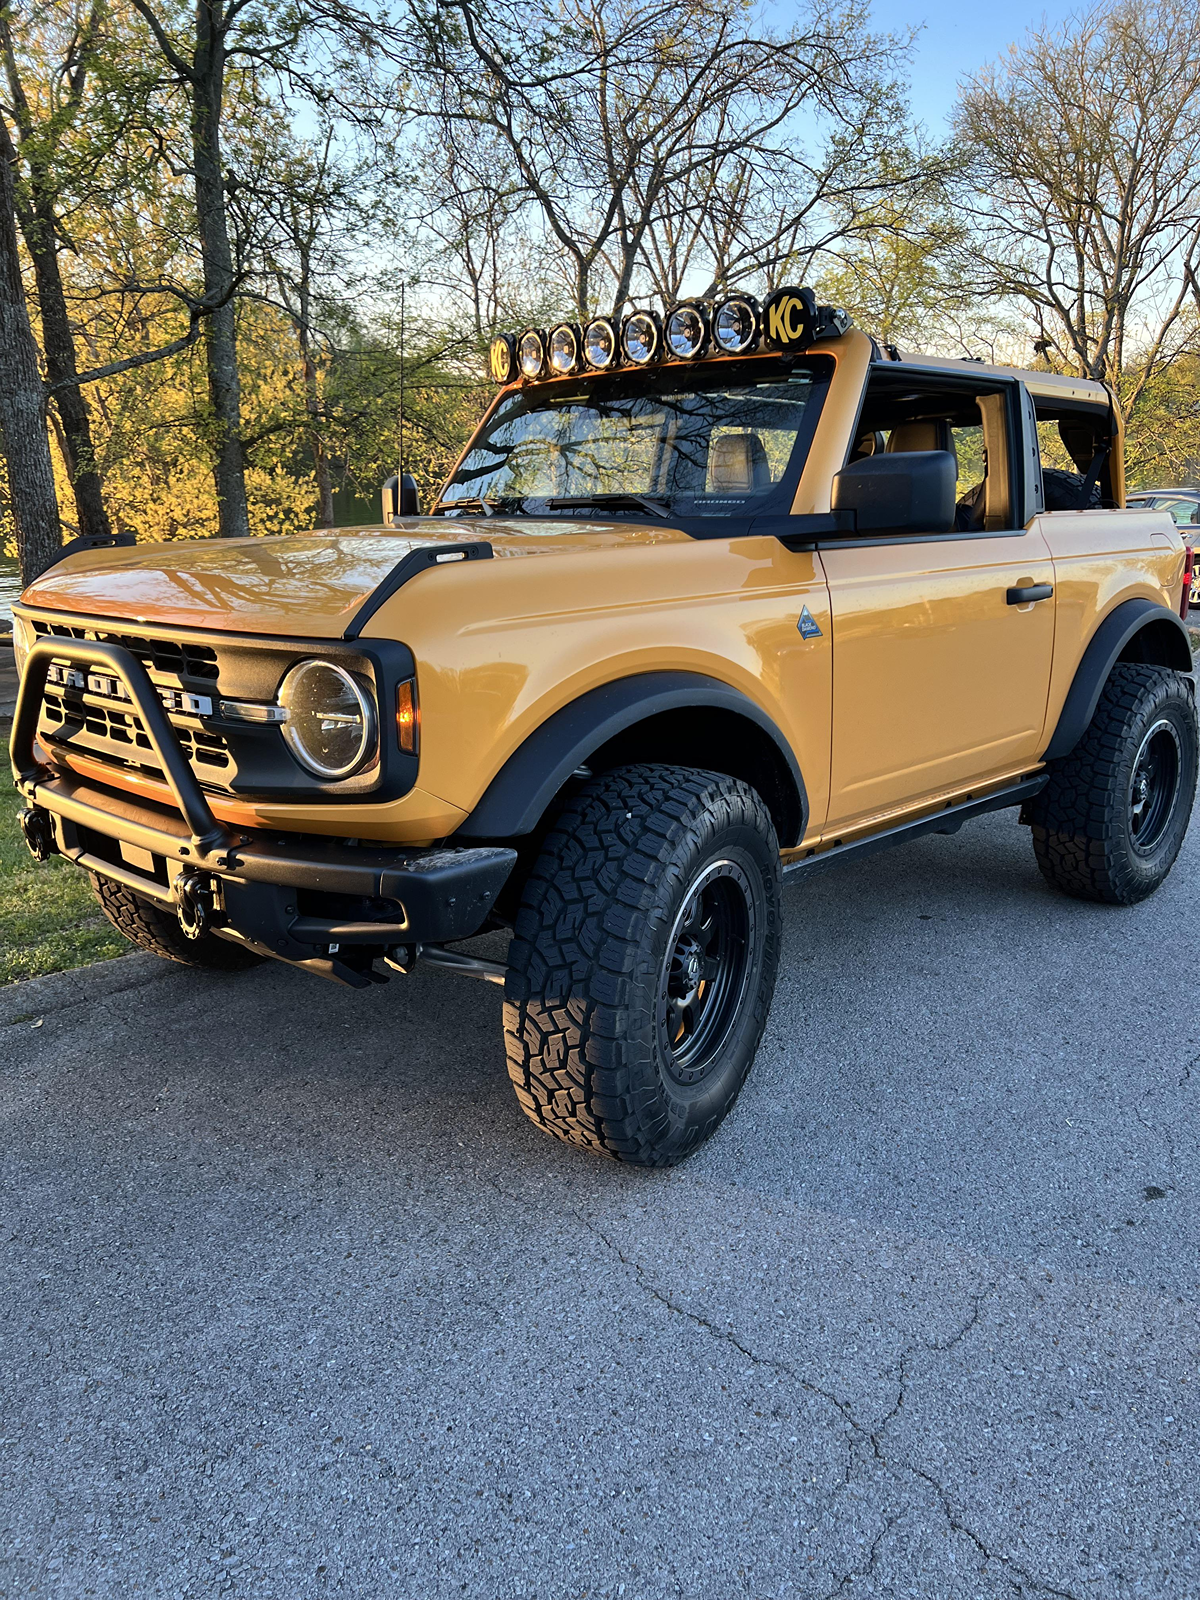 Ford Bronco Want to see your Heritage mods! 1712276361064-0y